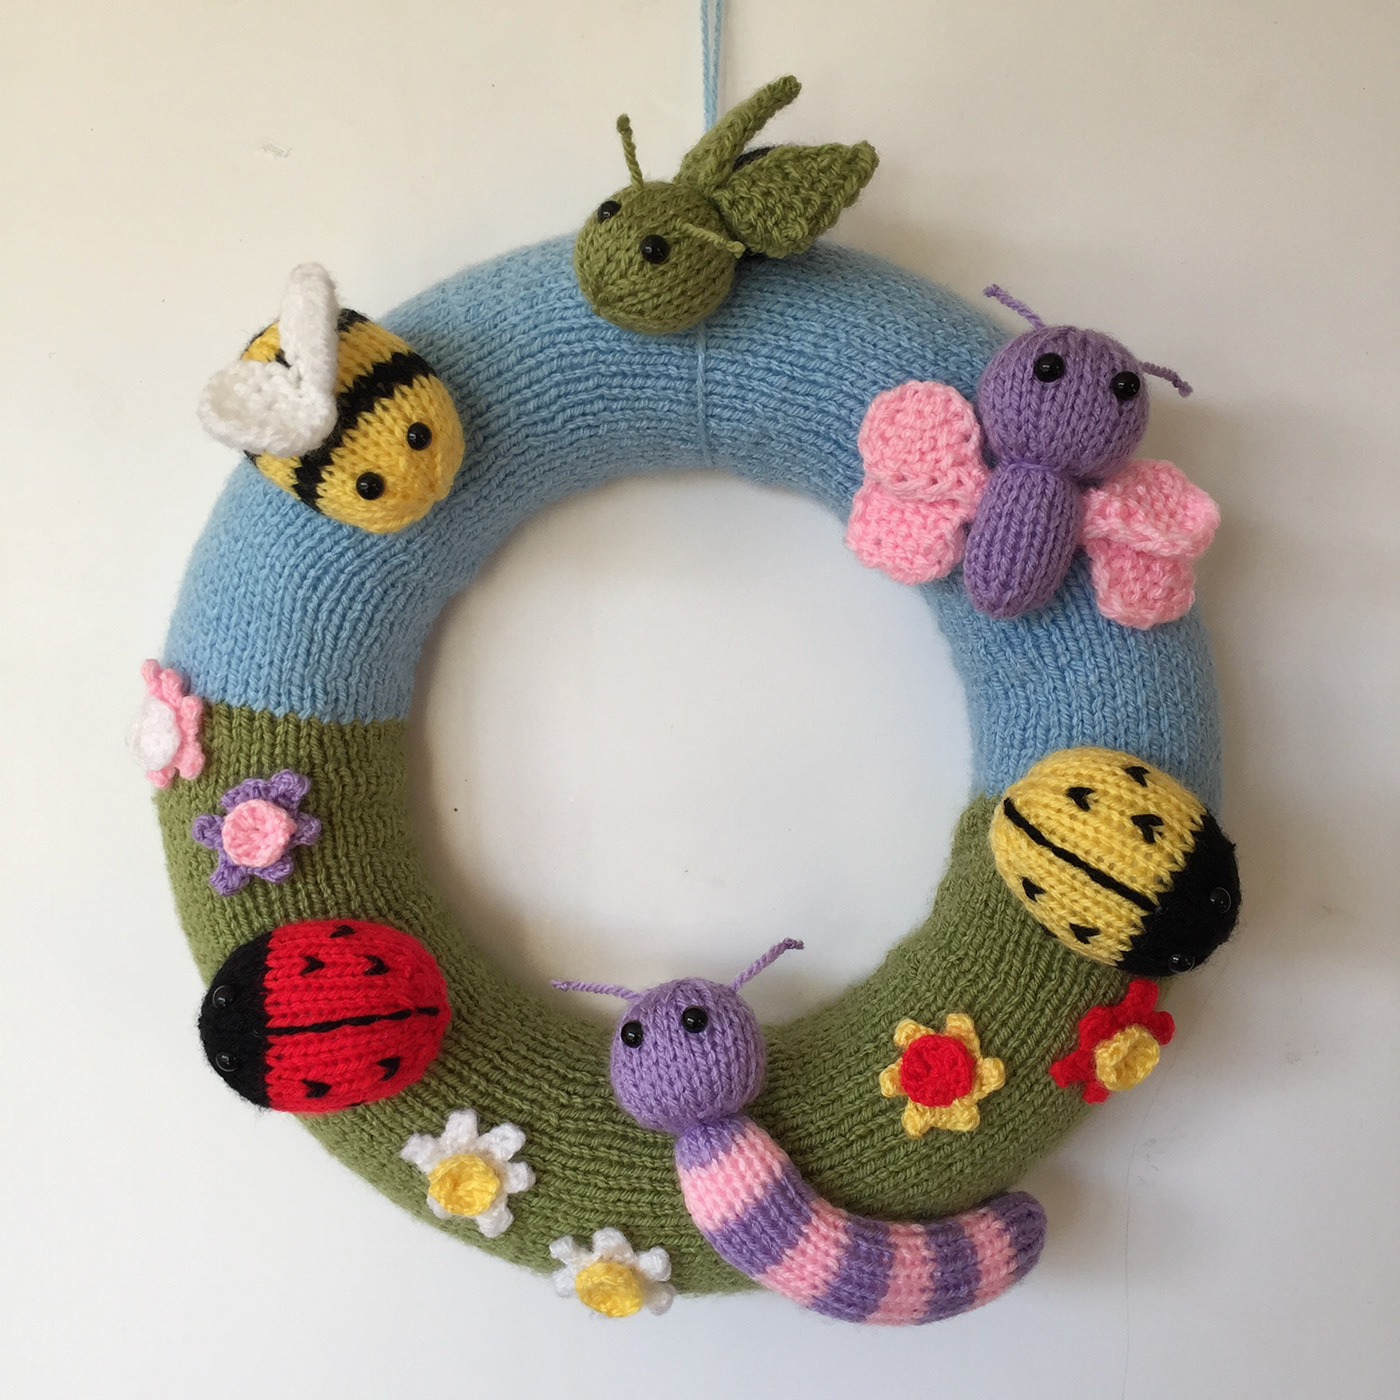 bees butterflies knitted insects Knitted toys knitters knitting knitting pattern design ladybirds springtime wreath